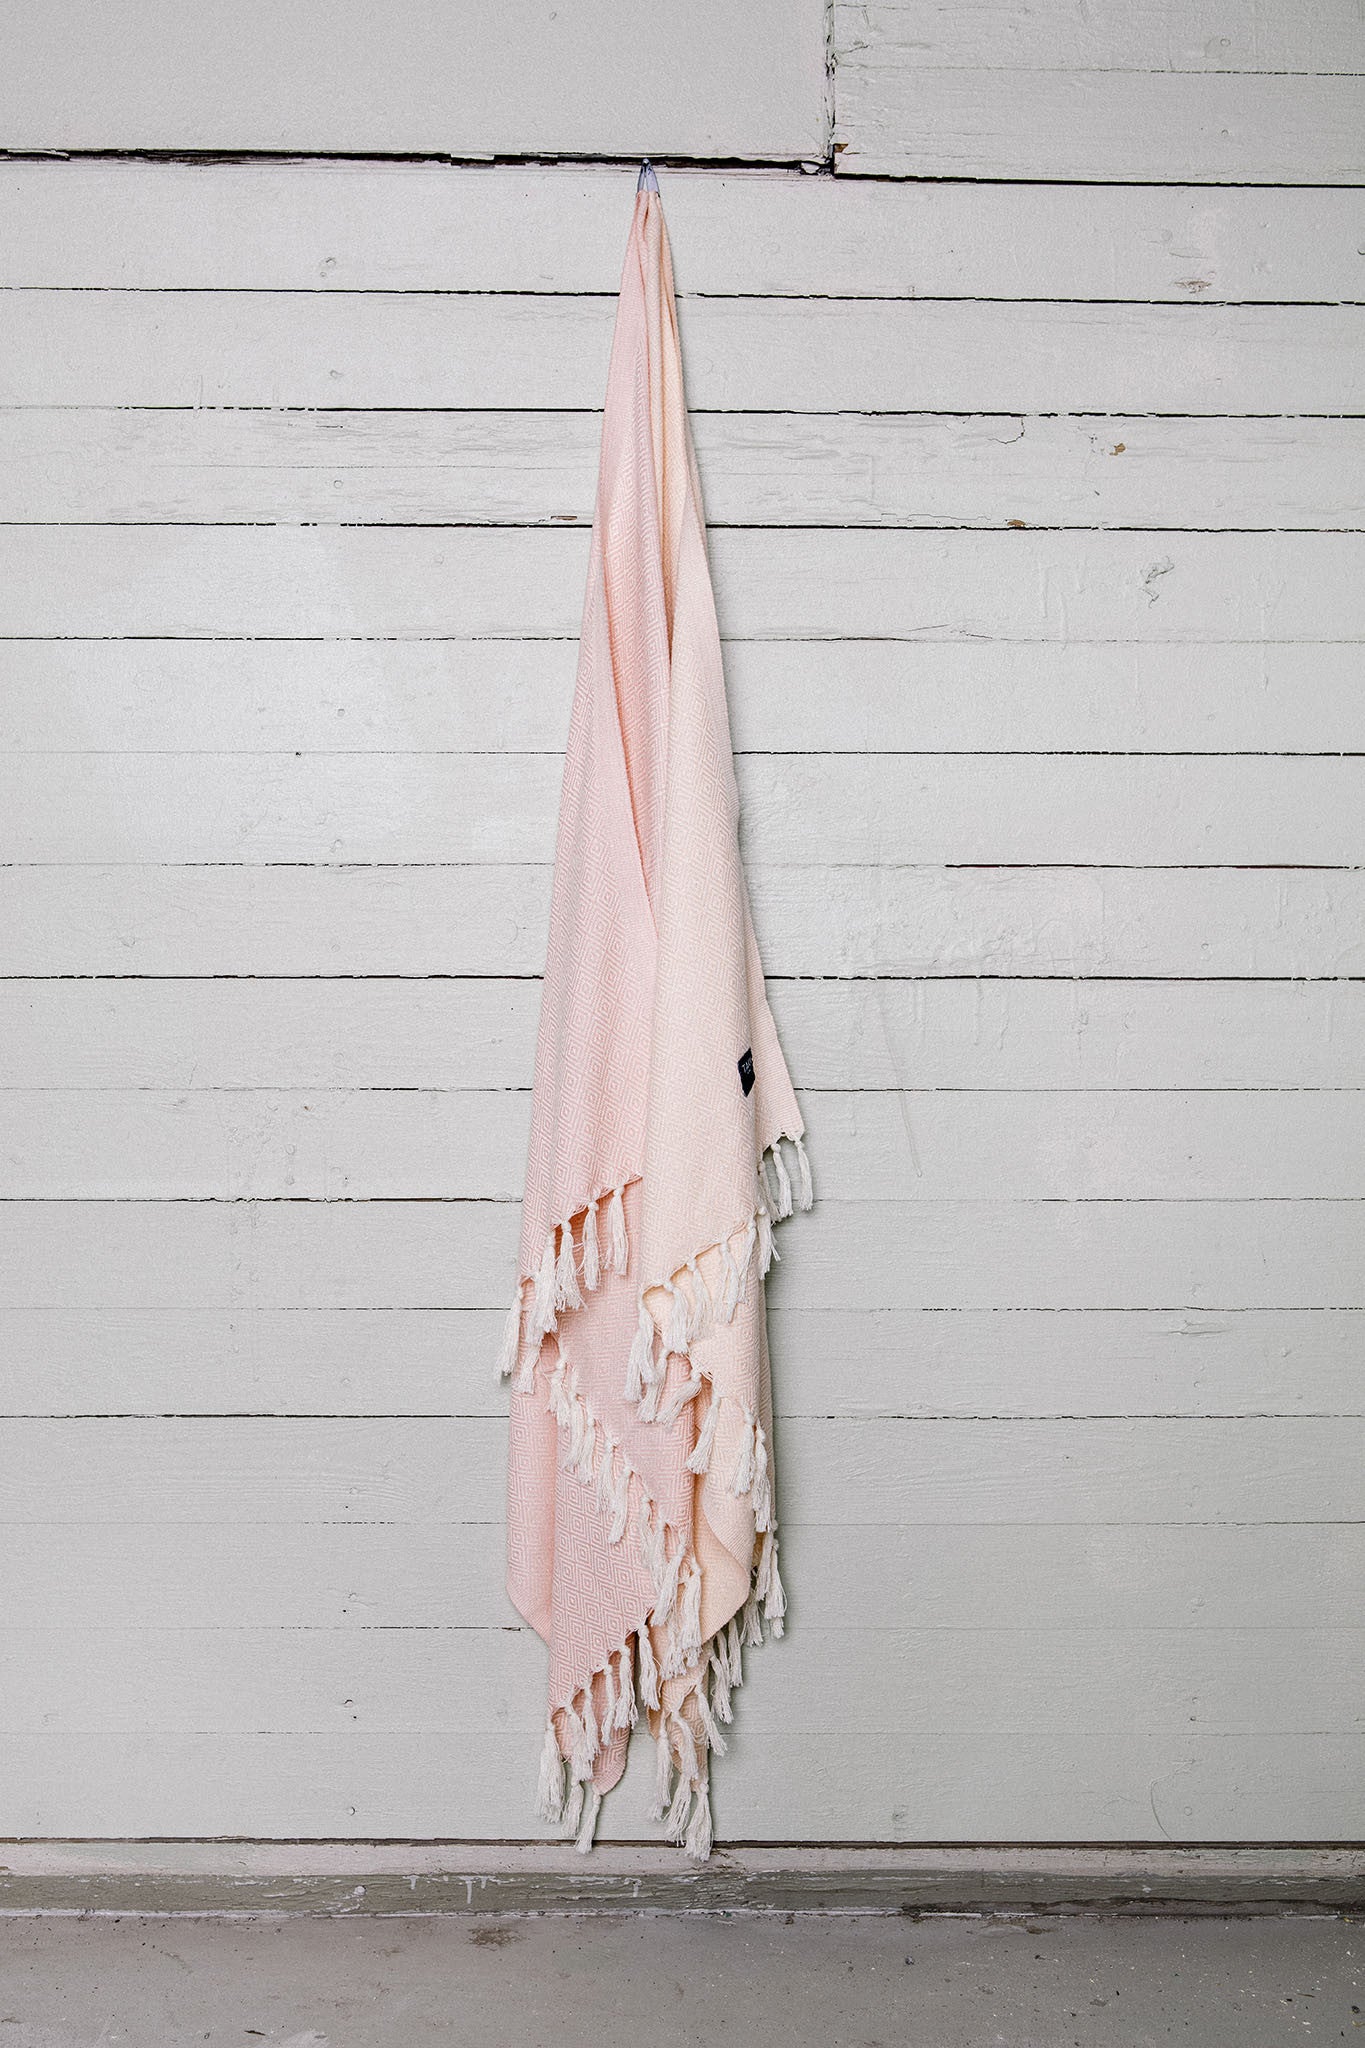 Luxurious hamam bath towel. Soft, absorbent, light weight, quick drying, aesthetically pleasing. Takes up little space. Ideal for bath, beach, travel, sports, yoga. Can also be used as a blanket or a scarf. Popular as a baby blanket. OEKO-TEX®, eco-friendly certification. 100% quality cotton. Pink hammam towel